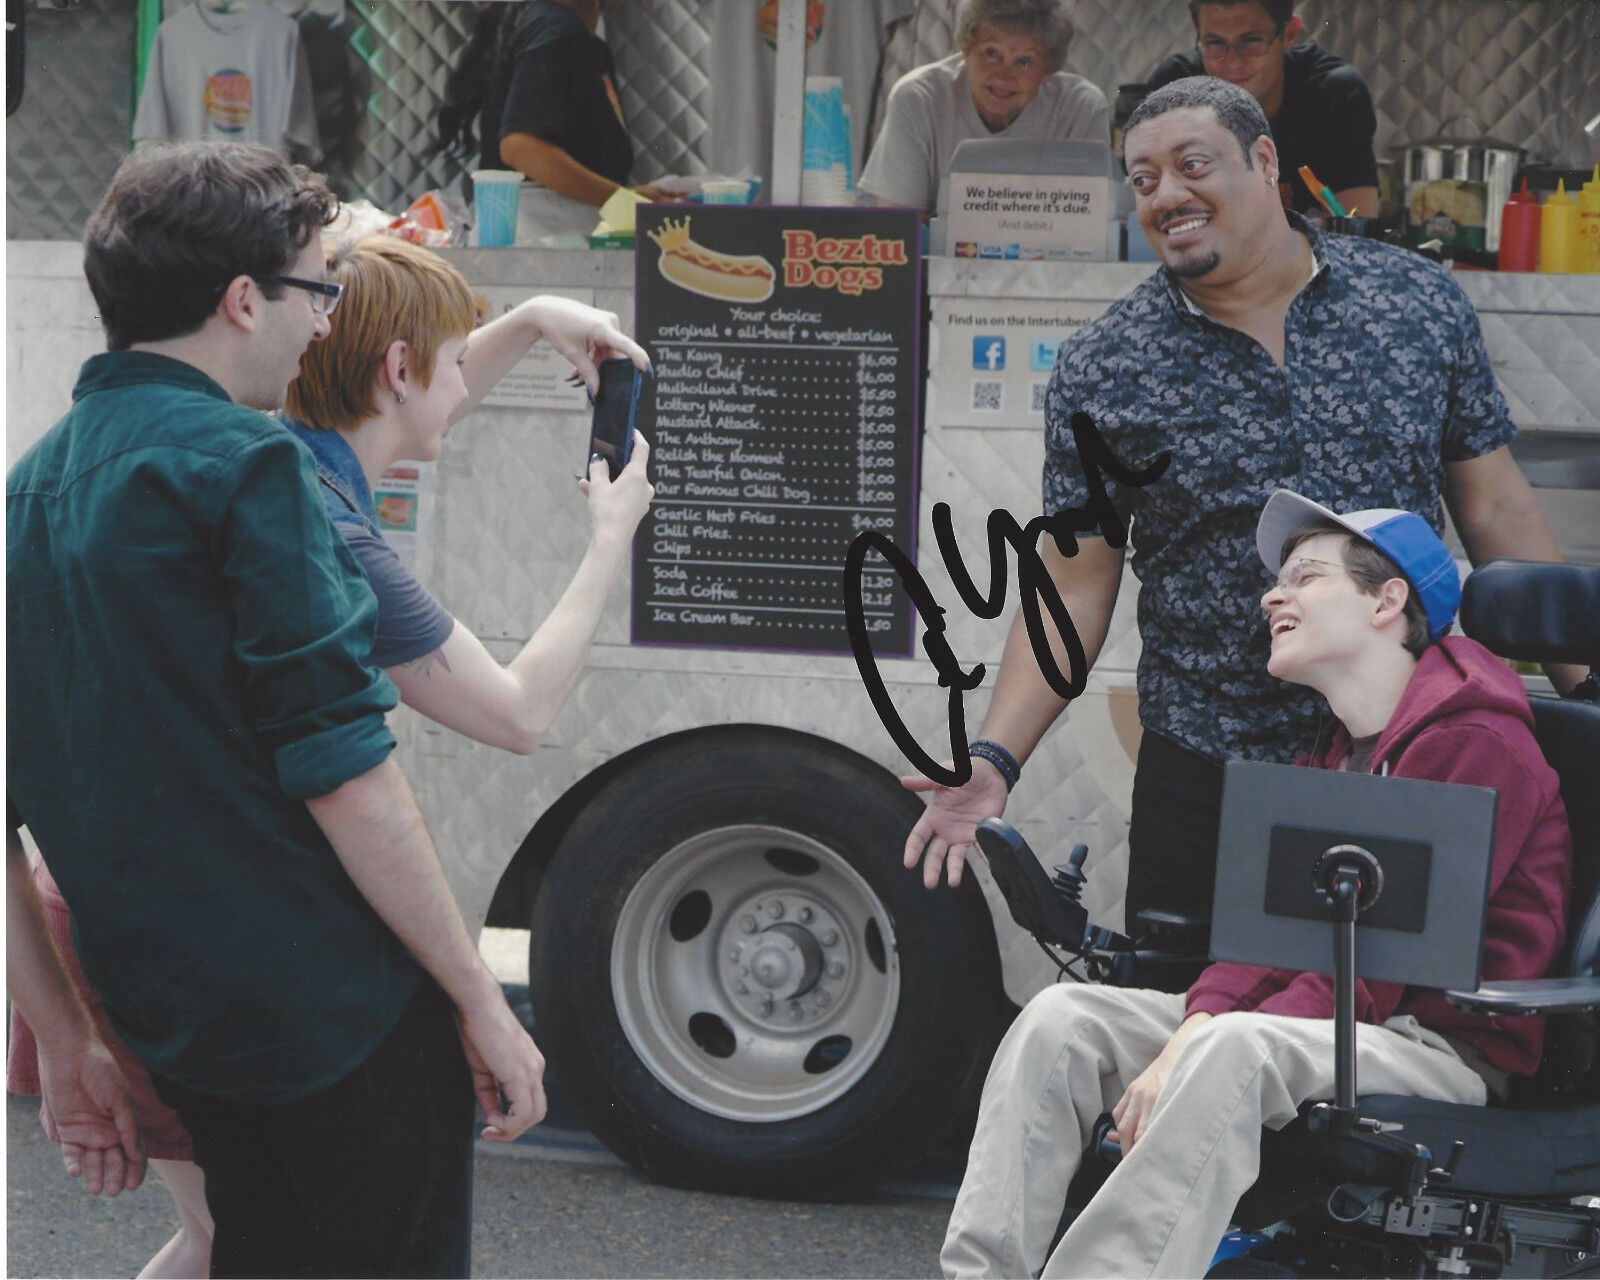 CEDRIC YARBROUGH SIGNED AUTHENTIC 'SPEEHLESS' 8X10 Photo Poster painting w/COA COMEDIAN ACTOR